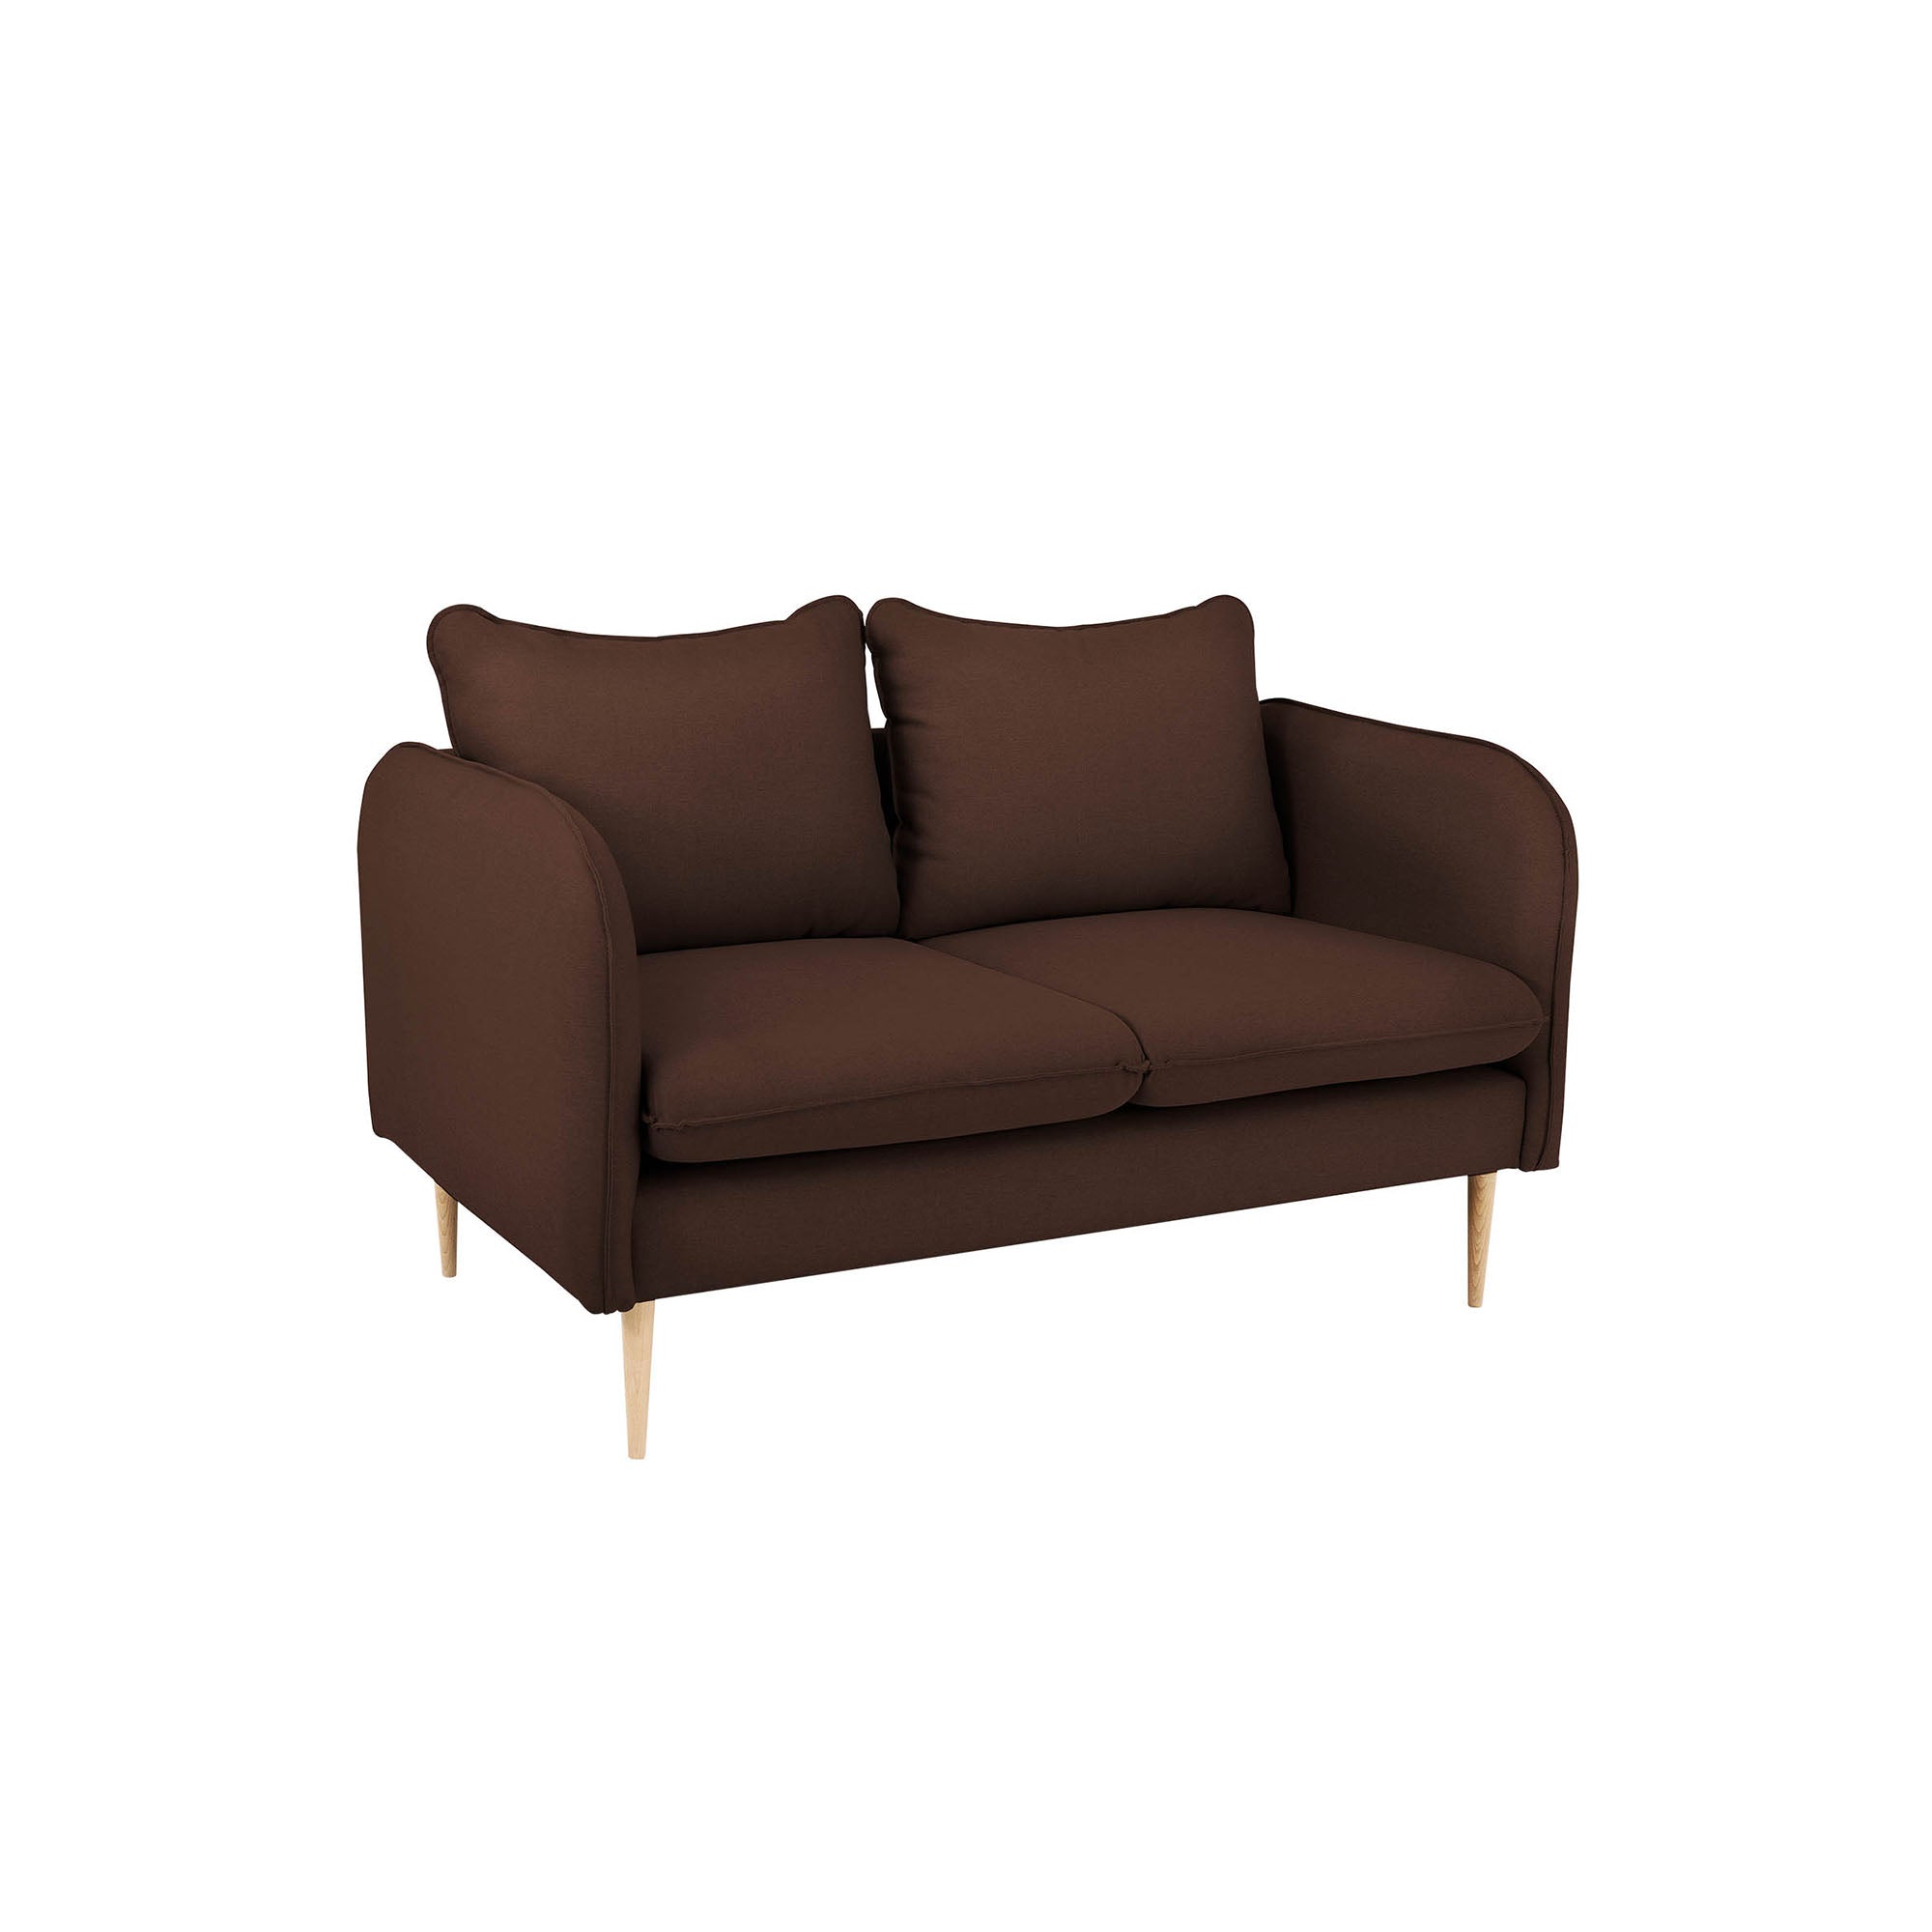 POSH WOOD Sofa 2 Seaters upholstery colour brown